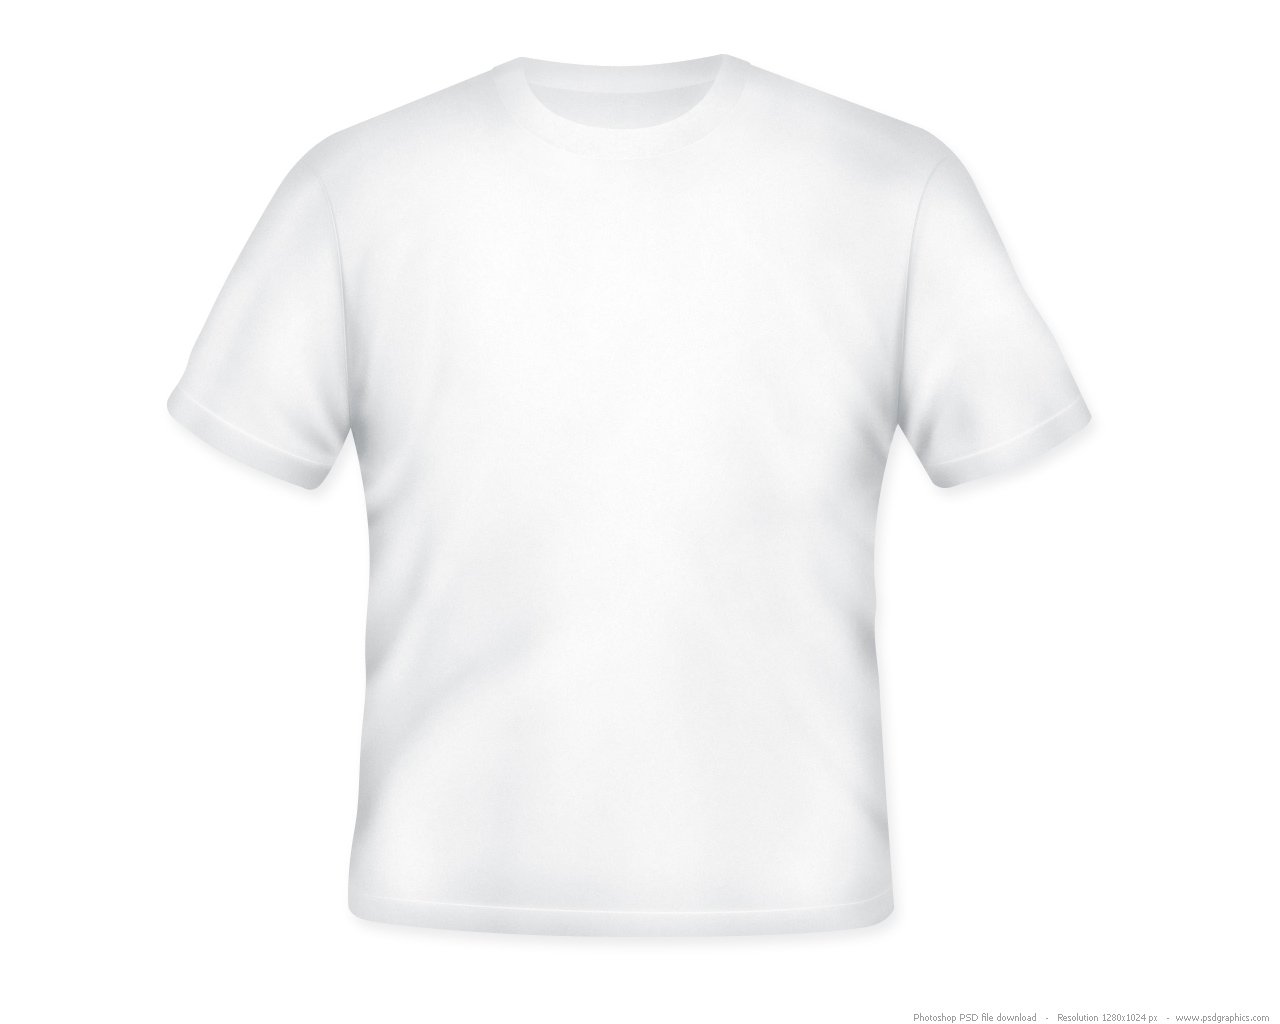 Buy blank white t shirt template - 22% OFF! In Blank Tee Shirt Template